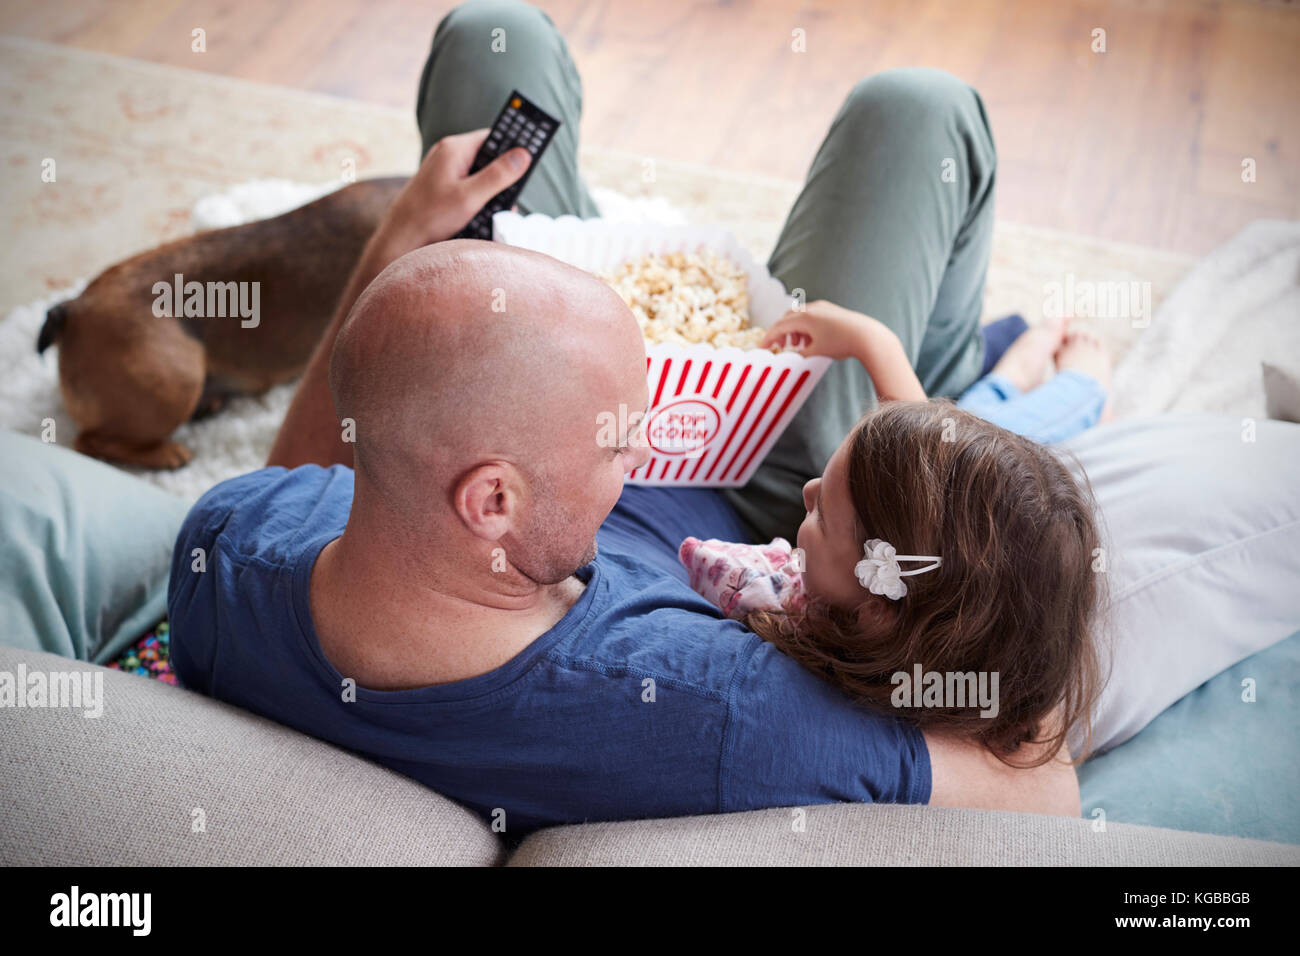 Dad and daughter eating popcorn at home, over shoulder view Stock Photo